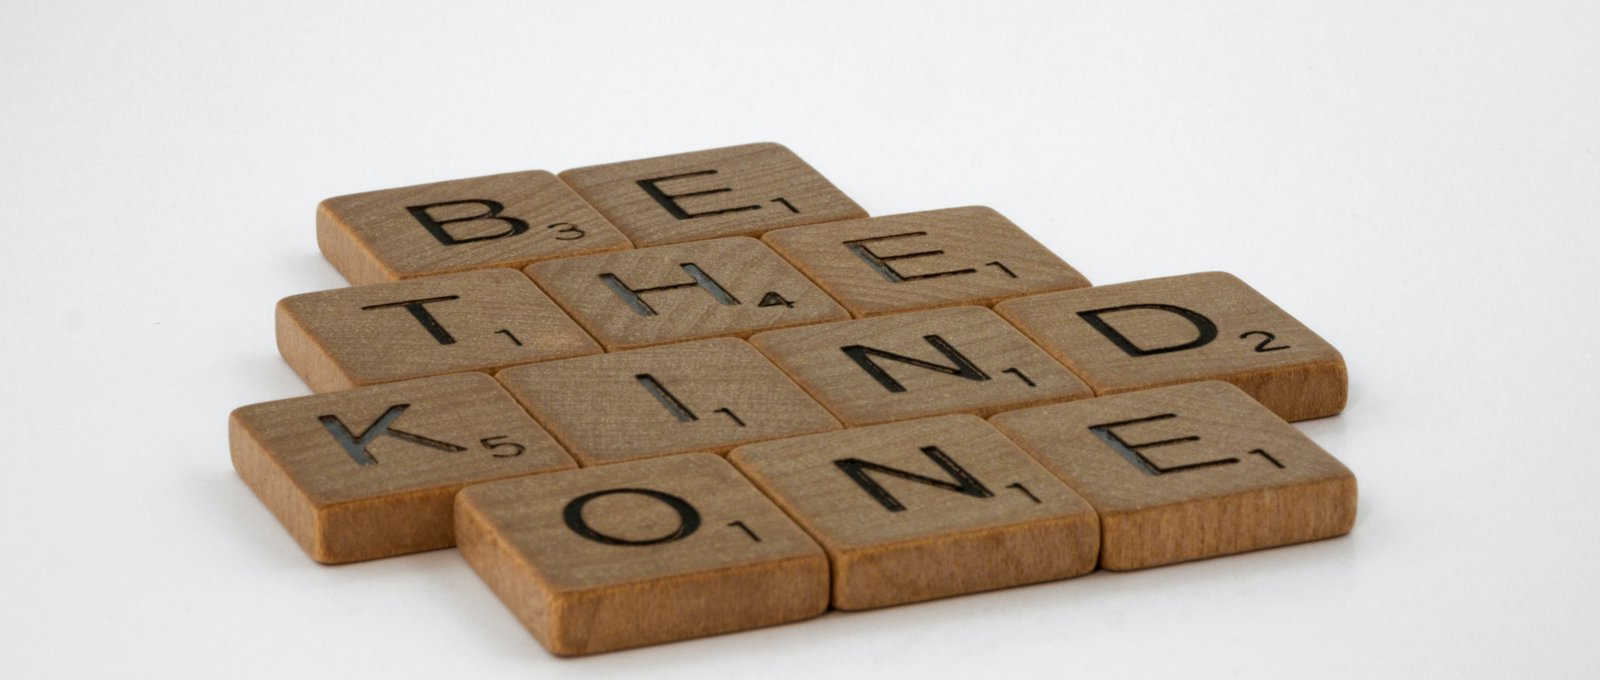 Photograph of wooden tiles spelling out 'Be the kind one'